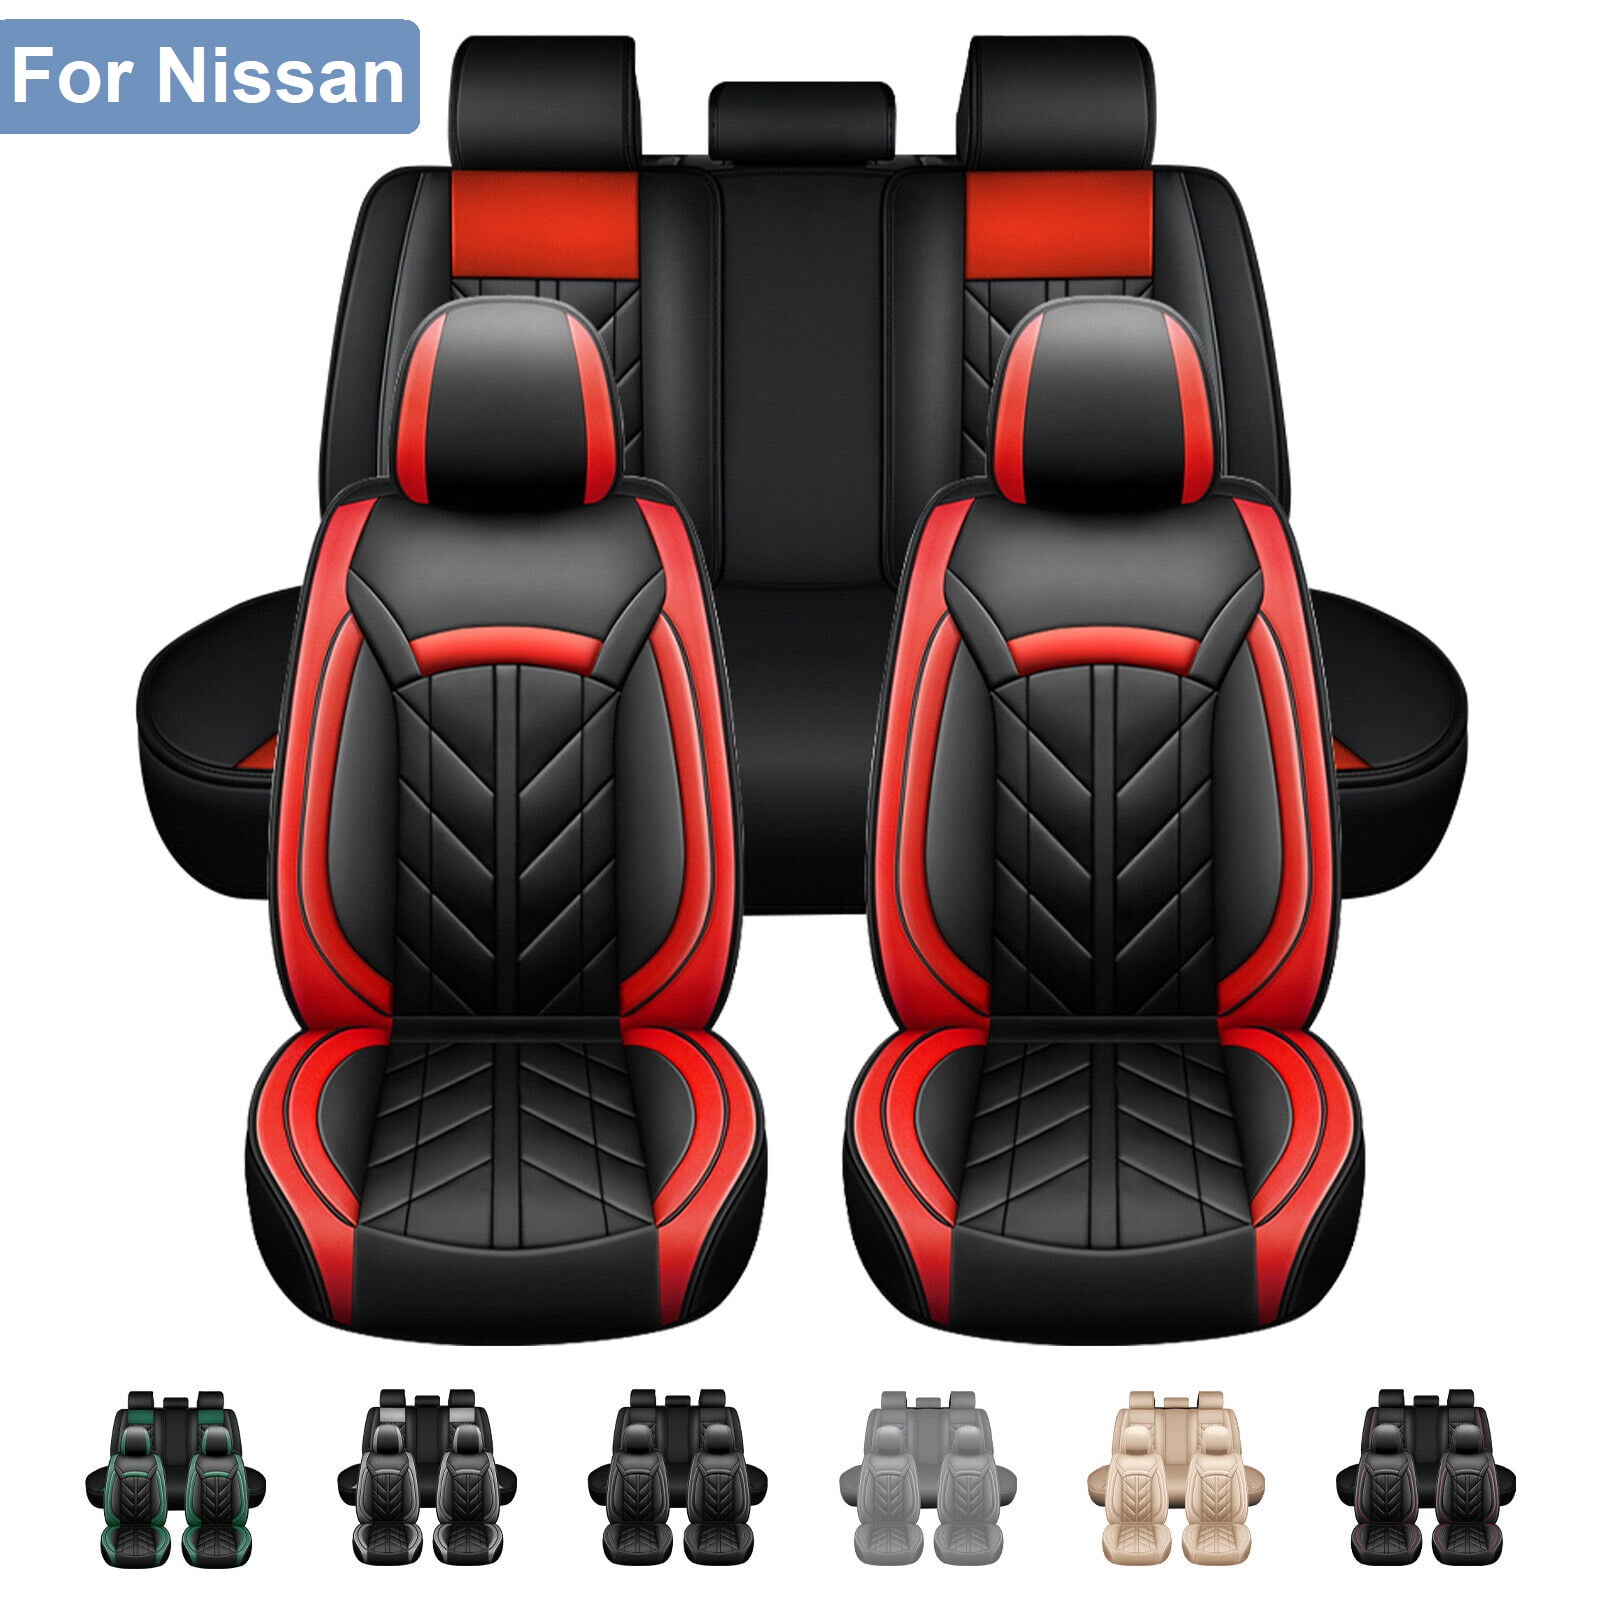 ACTC Car Seat Covers for Nissan MAGNITE Towel Type